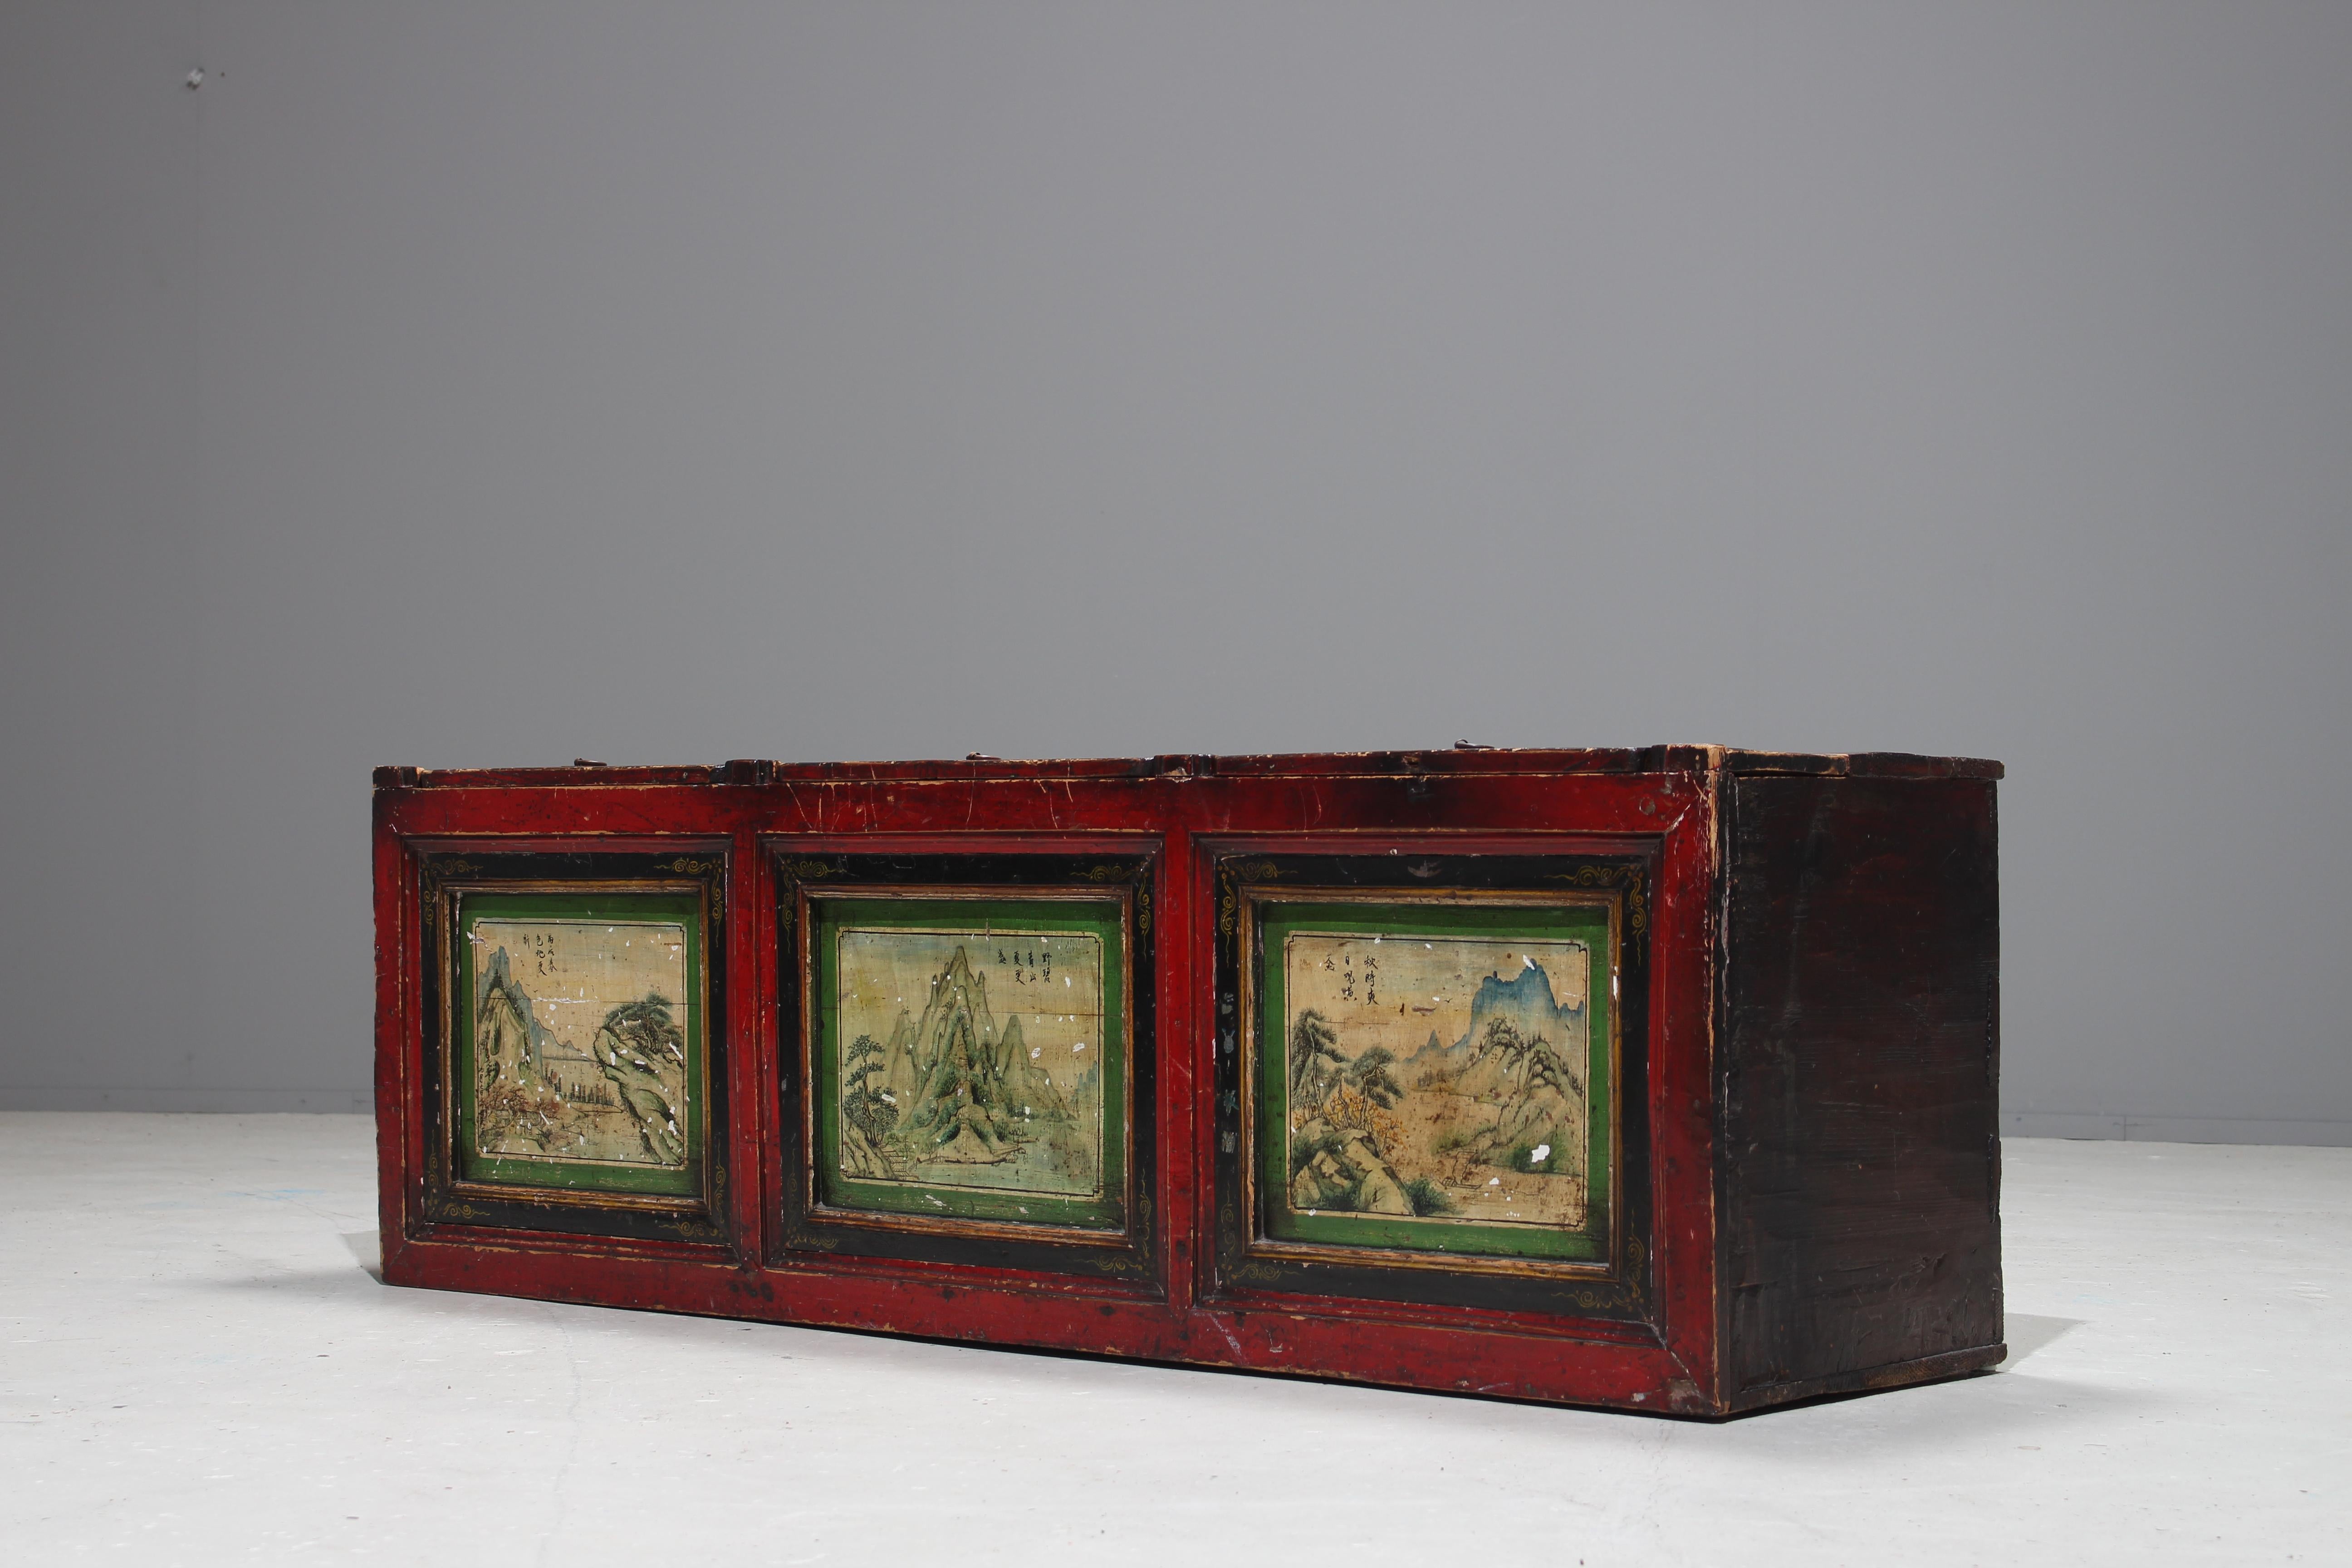 Mindblowing hand painted Mongolian nomads chest from circa 1850.
A very rare one of a kind original oakwood piece of art and highly decorative.
The chest has three compartments and the brass handles are just lovely.
Very nice patina!